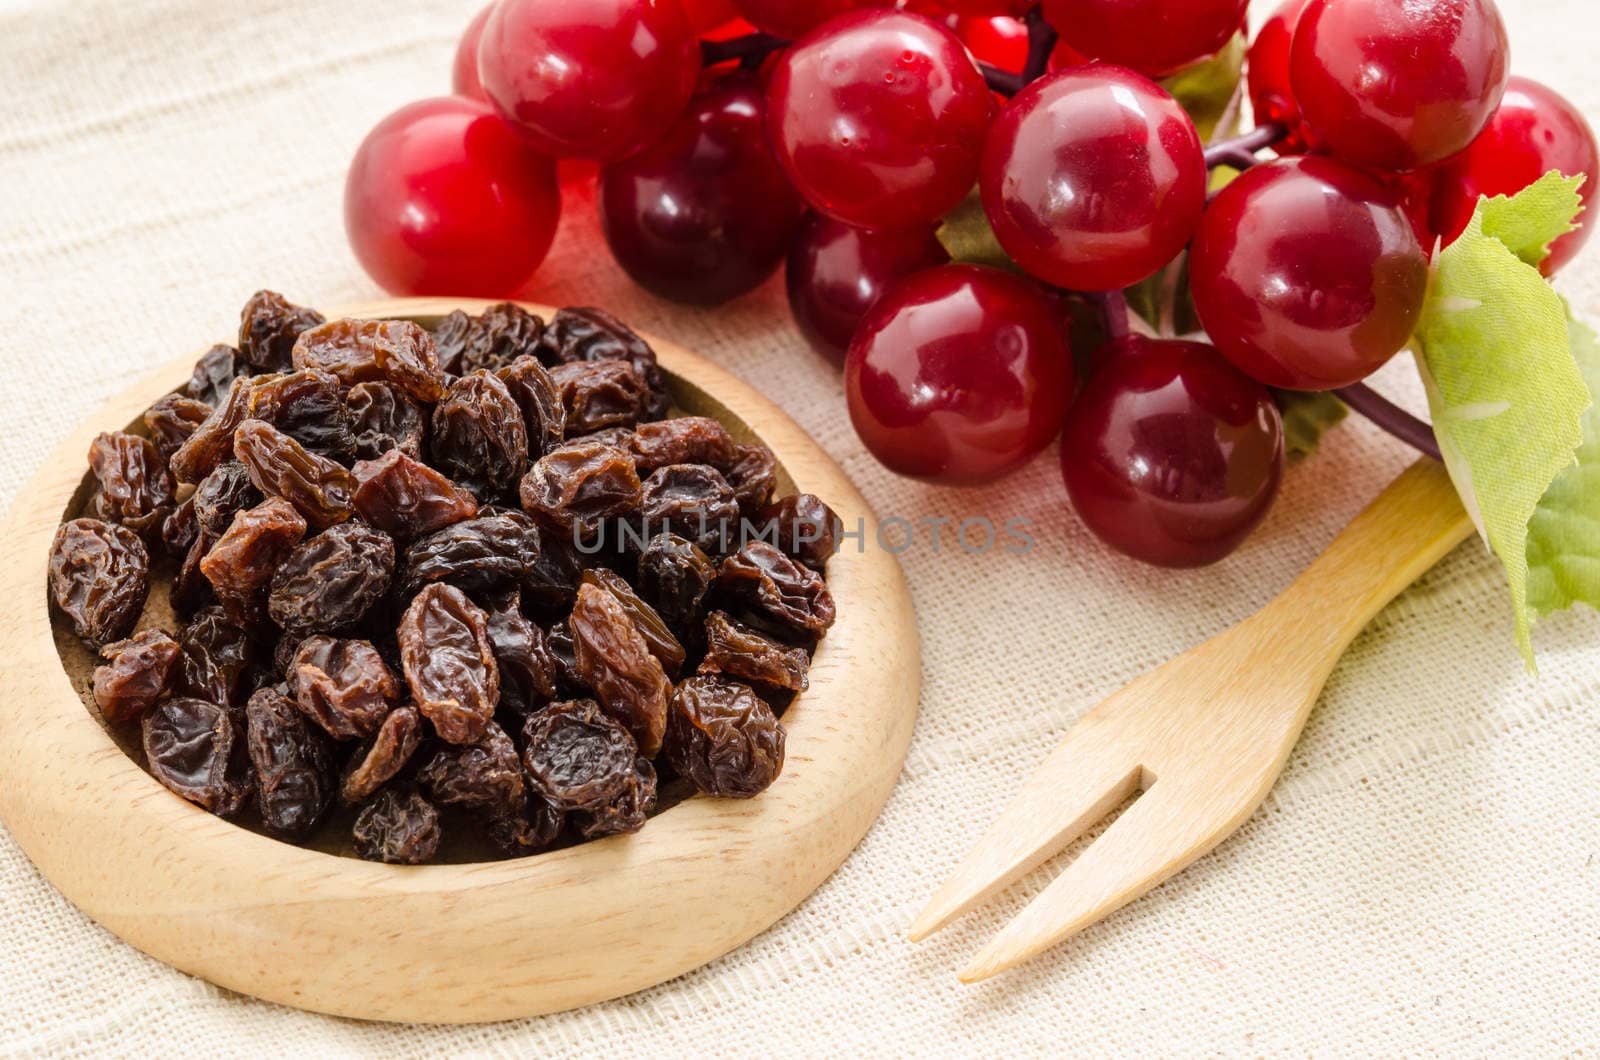 Raisins on a wooden dish and fresh red grapes on fabric background.